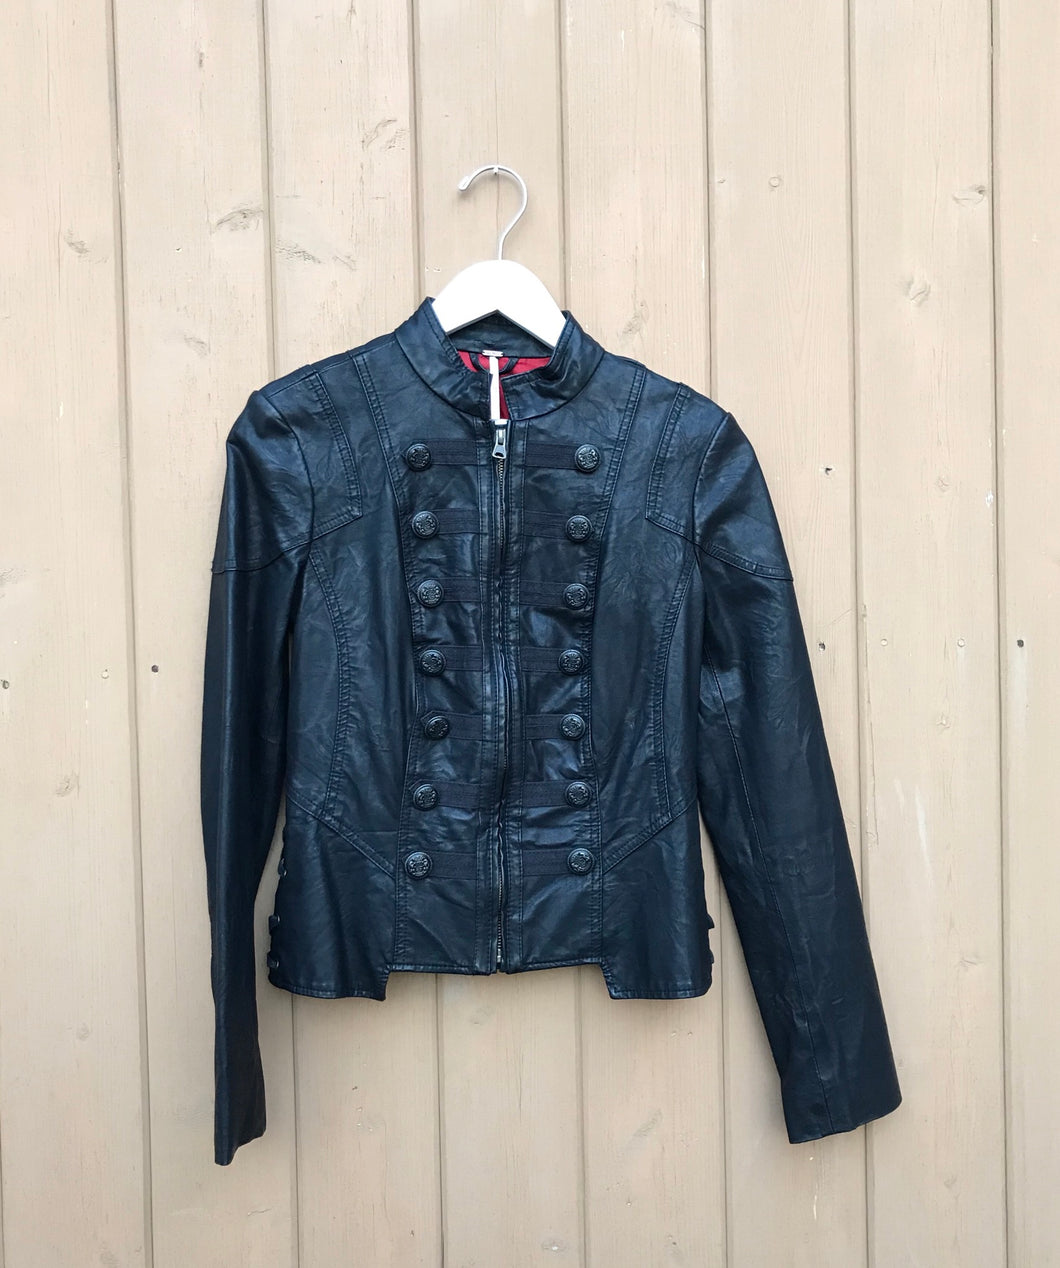 FREE PEOPLE Faux Leather Military Style Jacket